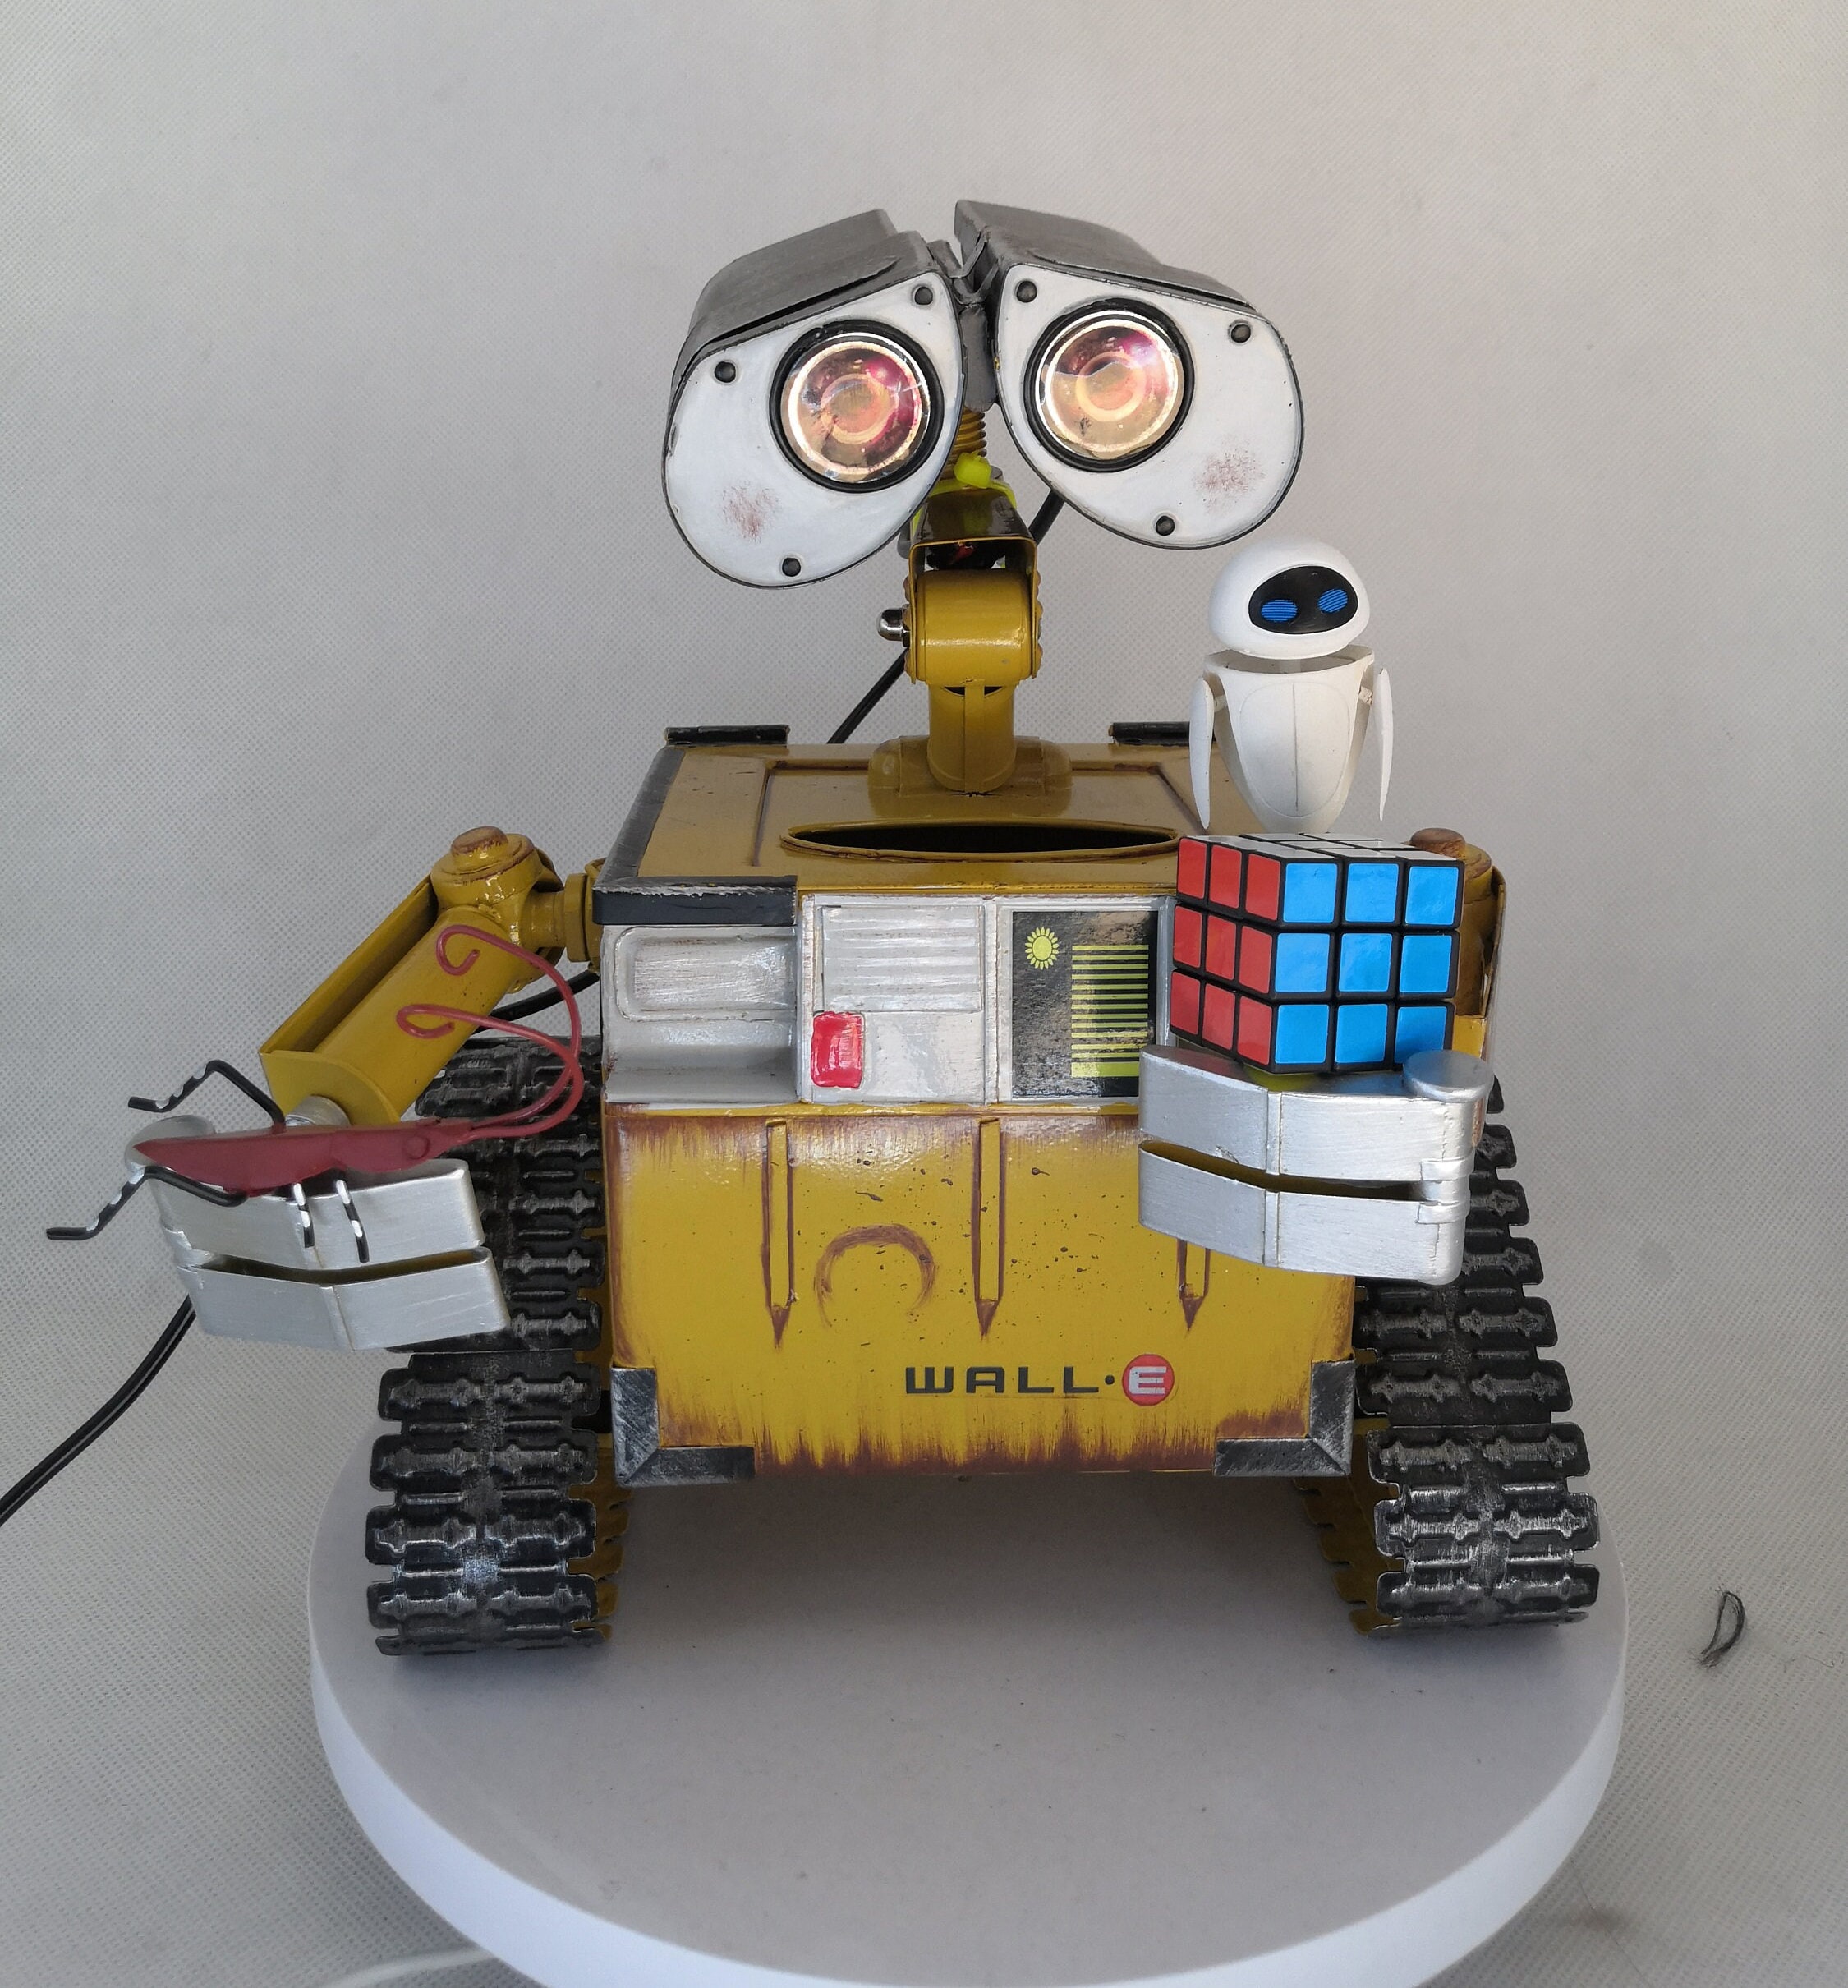 Wall-e Metal Robot Lamp, the Movie Wall.e Robot for Collection, Wall E and  Eve Robot,unique Gift 